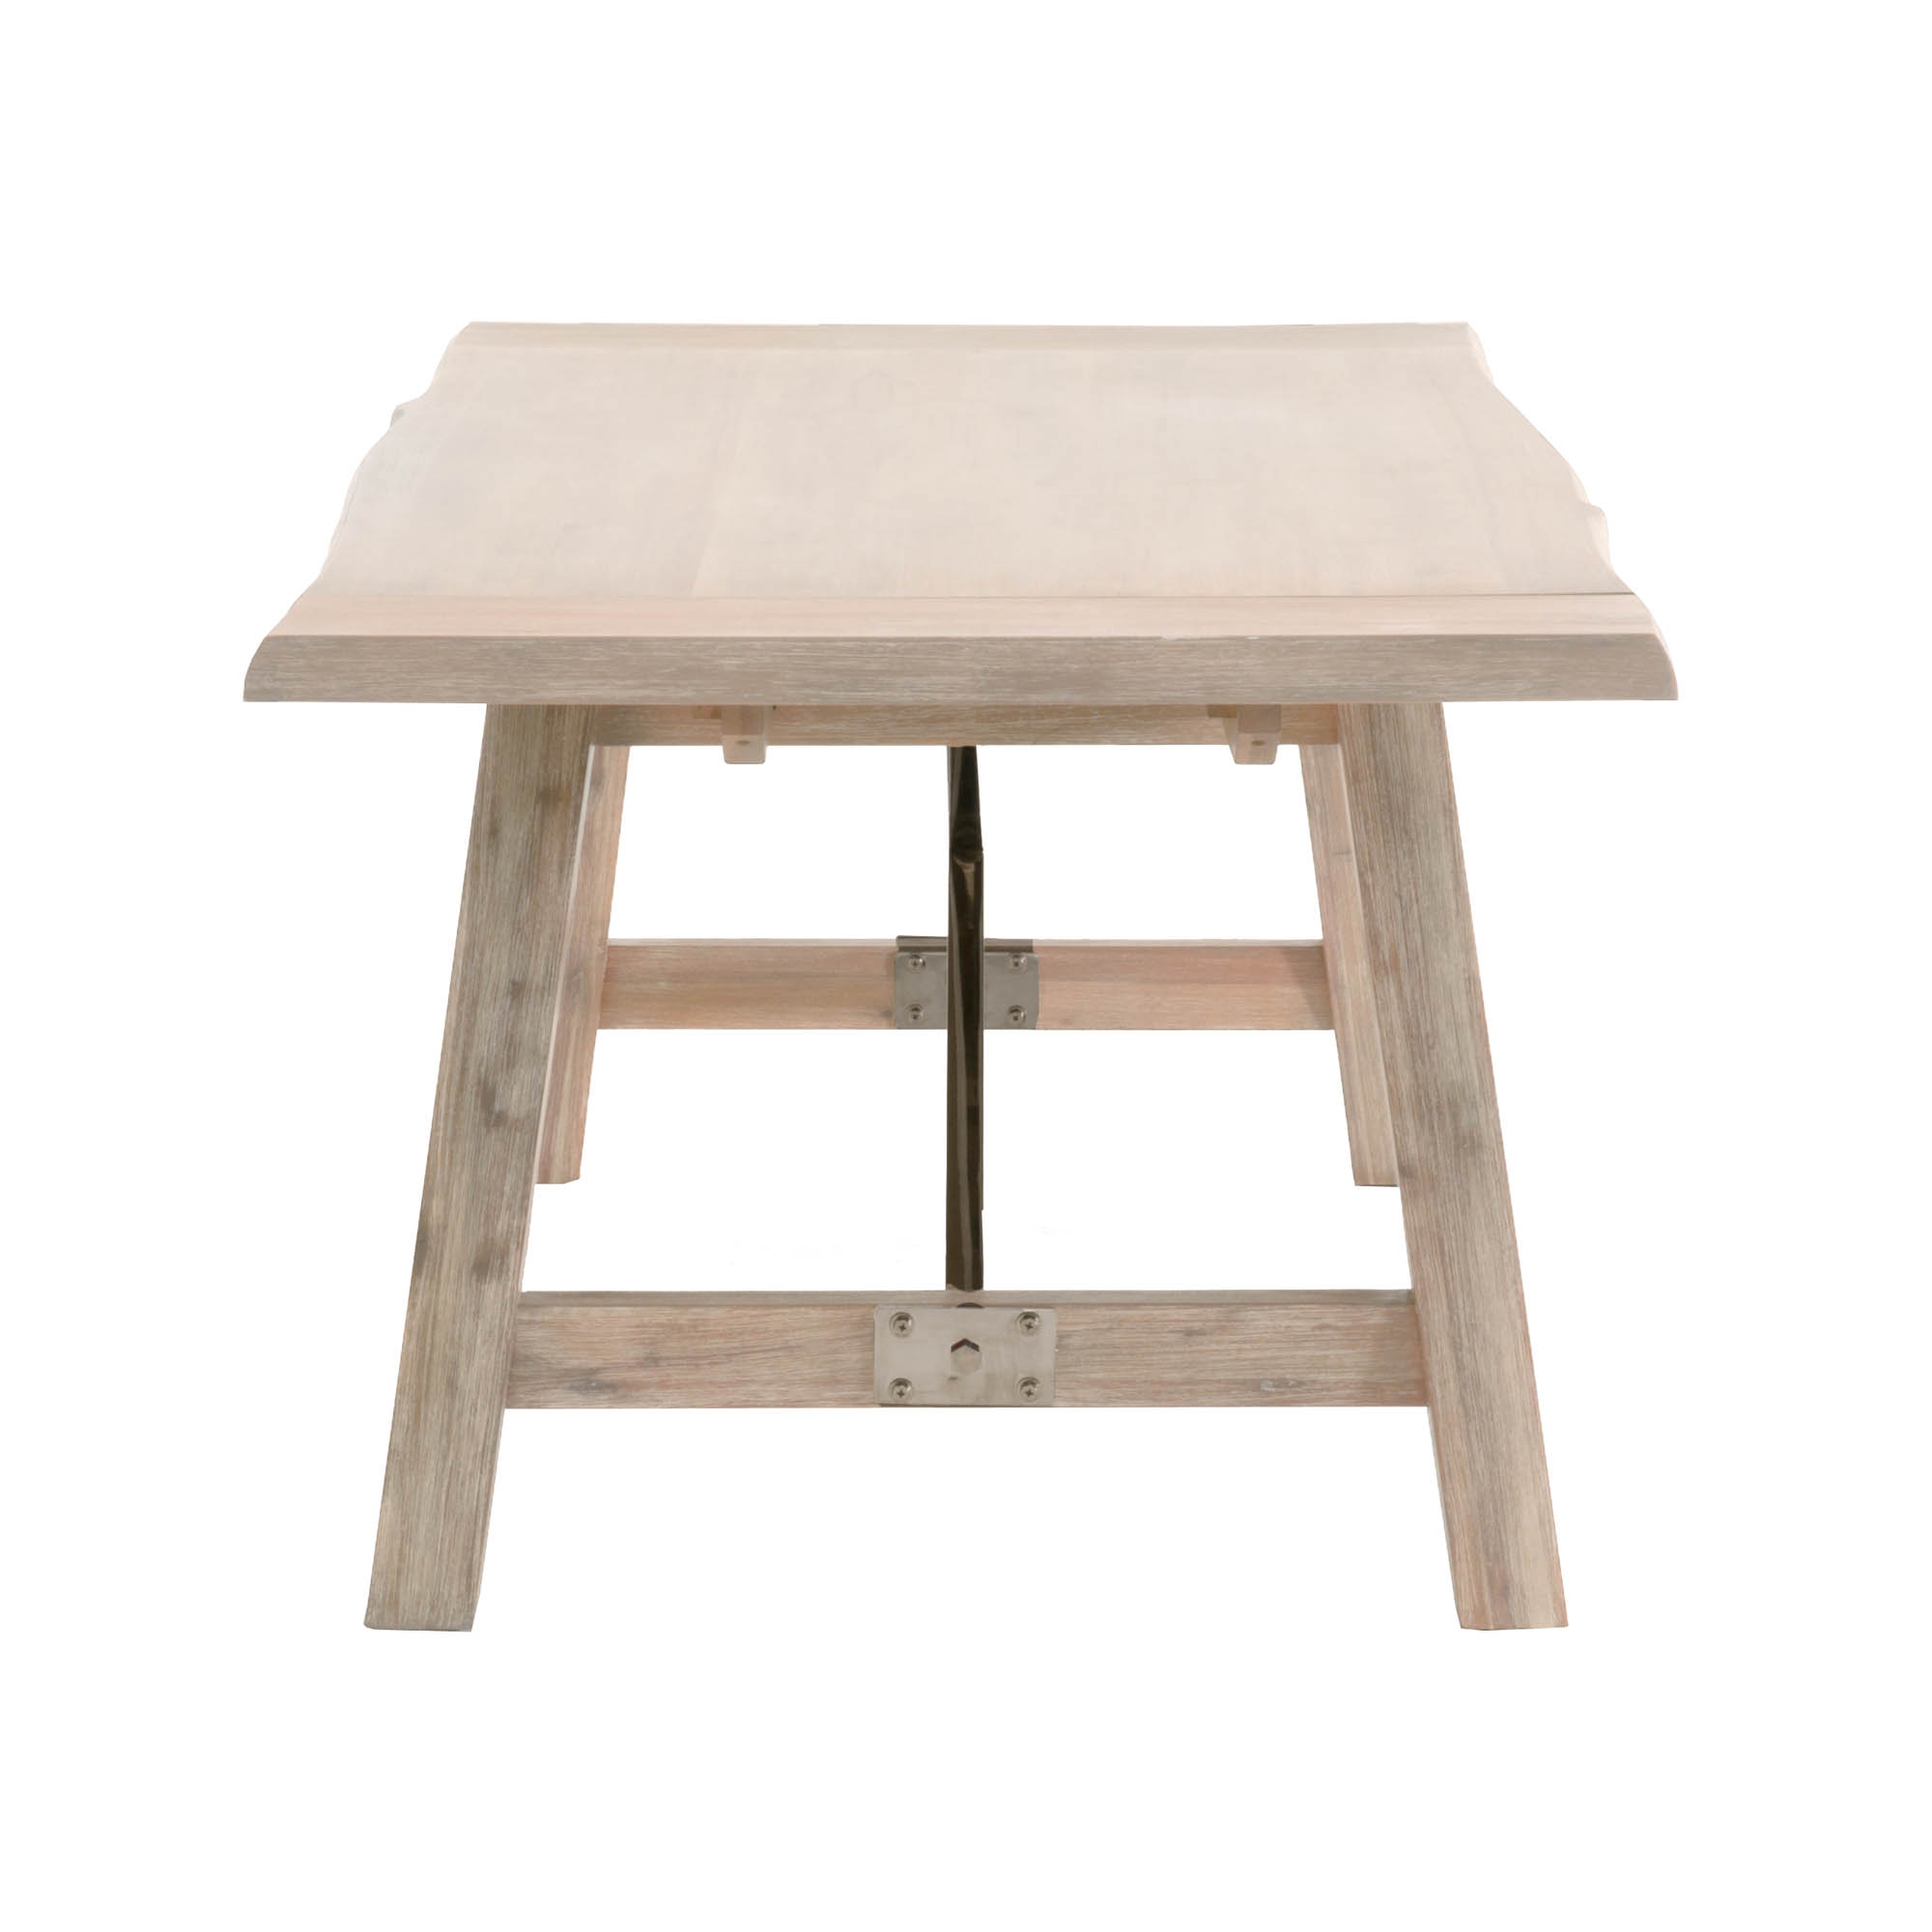 Nixon Extension Dining Table - Image 2